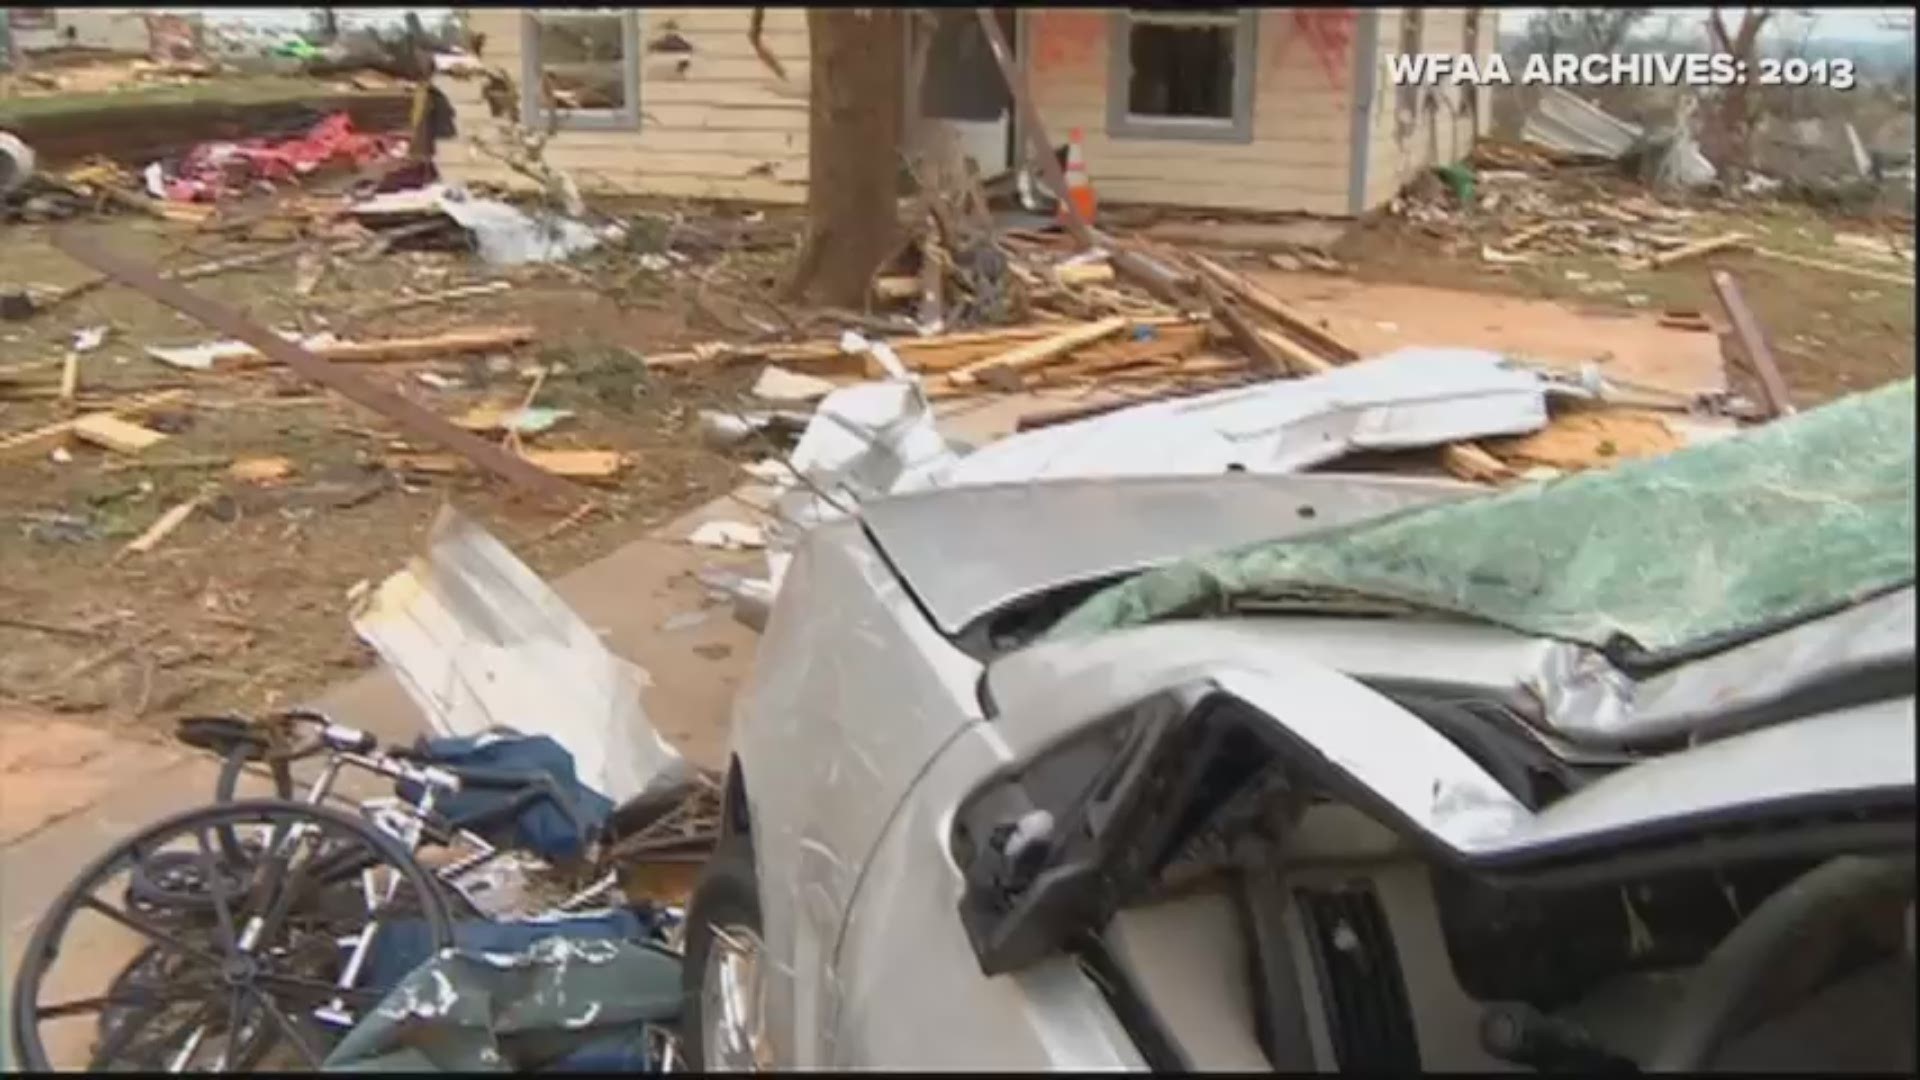 Footage from the WFAA archives shows the raw video and aftermath of an E-F4 tornado in Hood County in 2013.